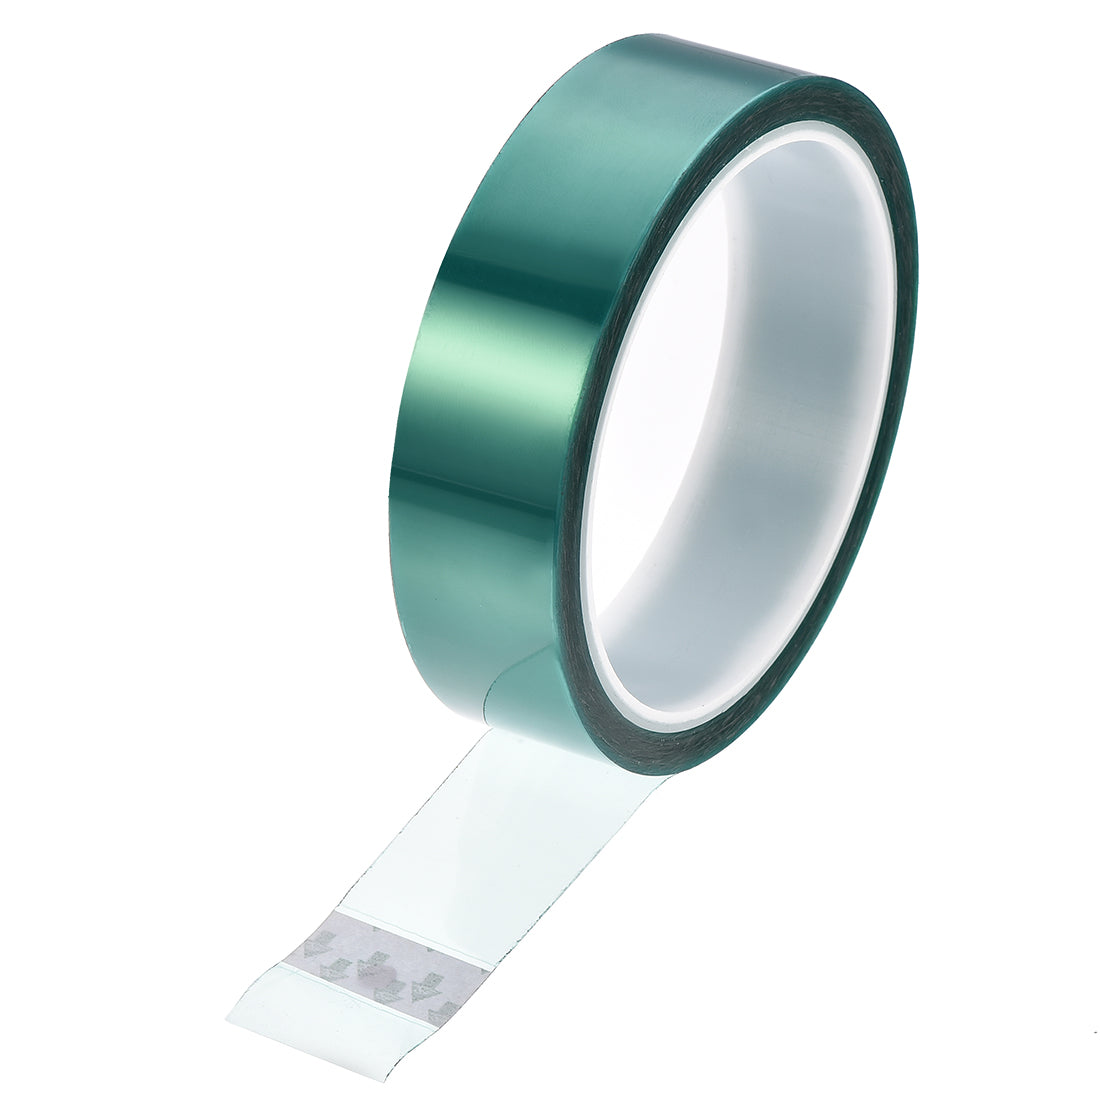 uxcell Uxcell 25mm PET Tape Green High Temperature Tape 33.0m/108.2ft